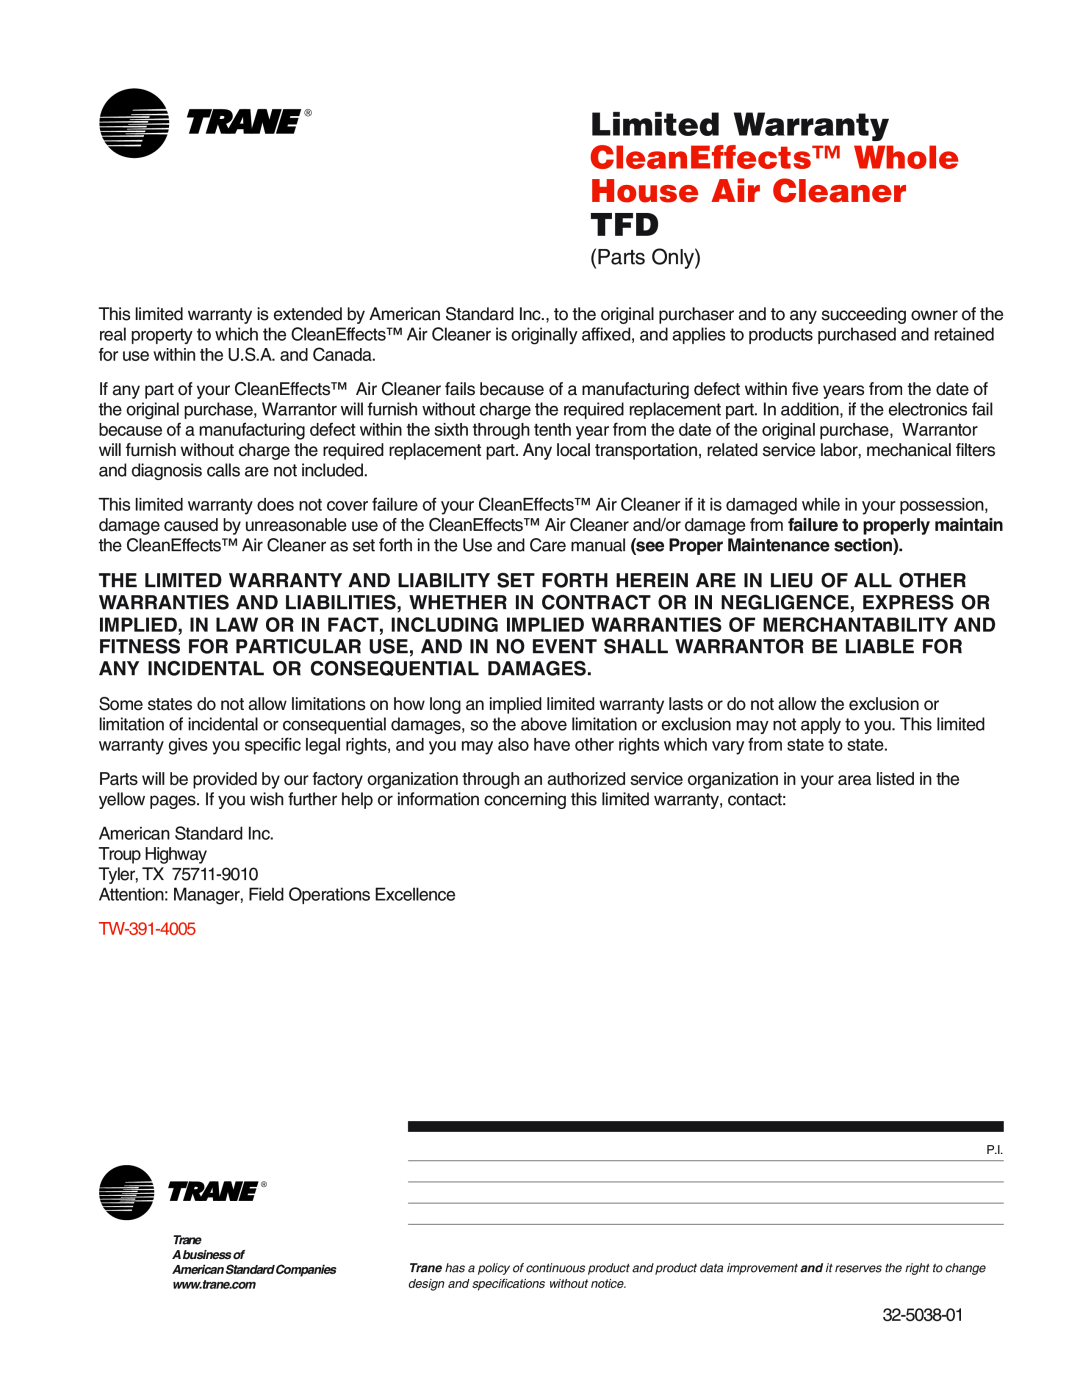 Trane Air Filtration System manual Limited Warranty, CleanEffects Whole House Air Cleaner, TW-391-4005, 32-5038-01 